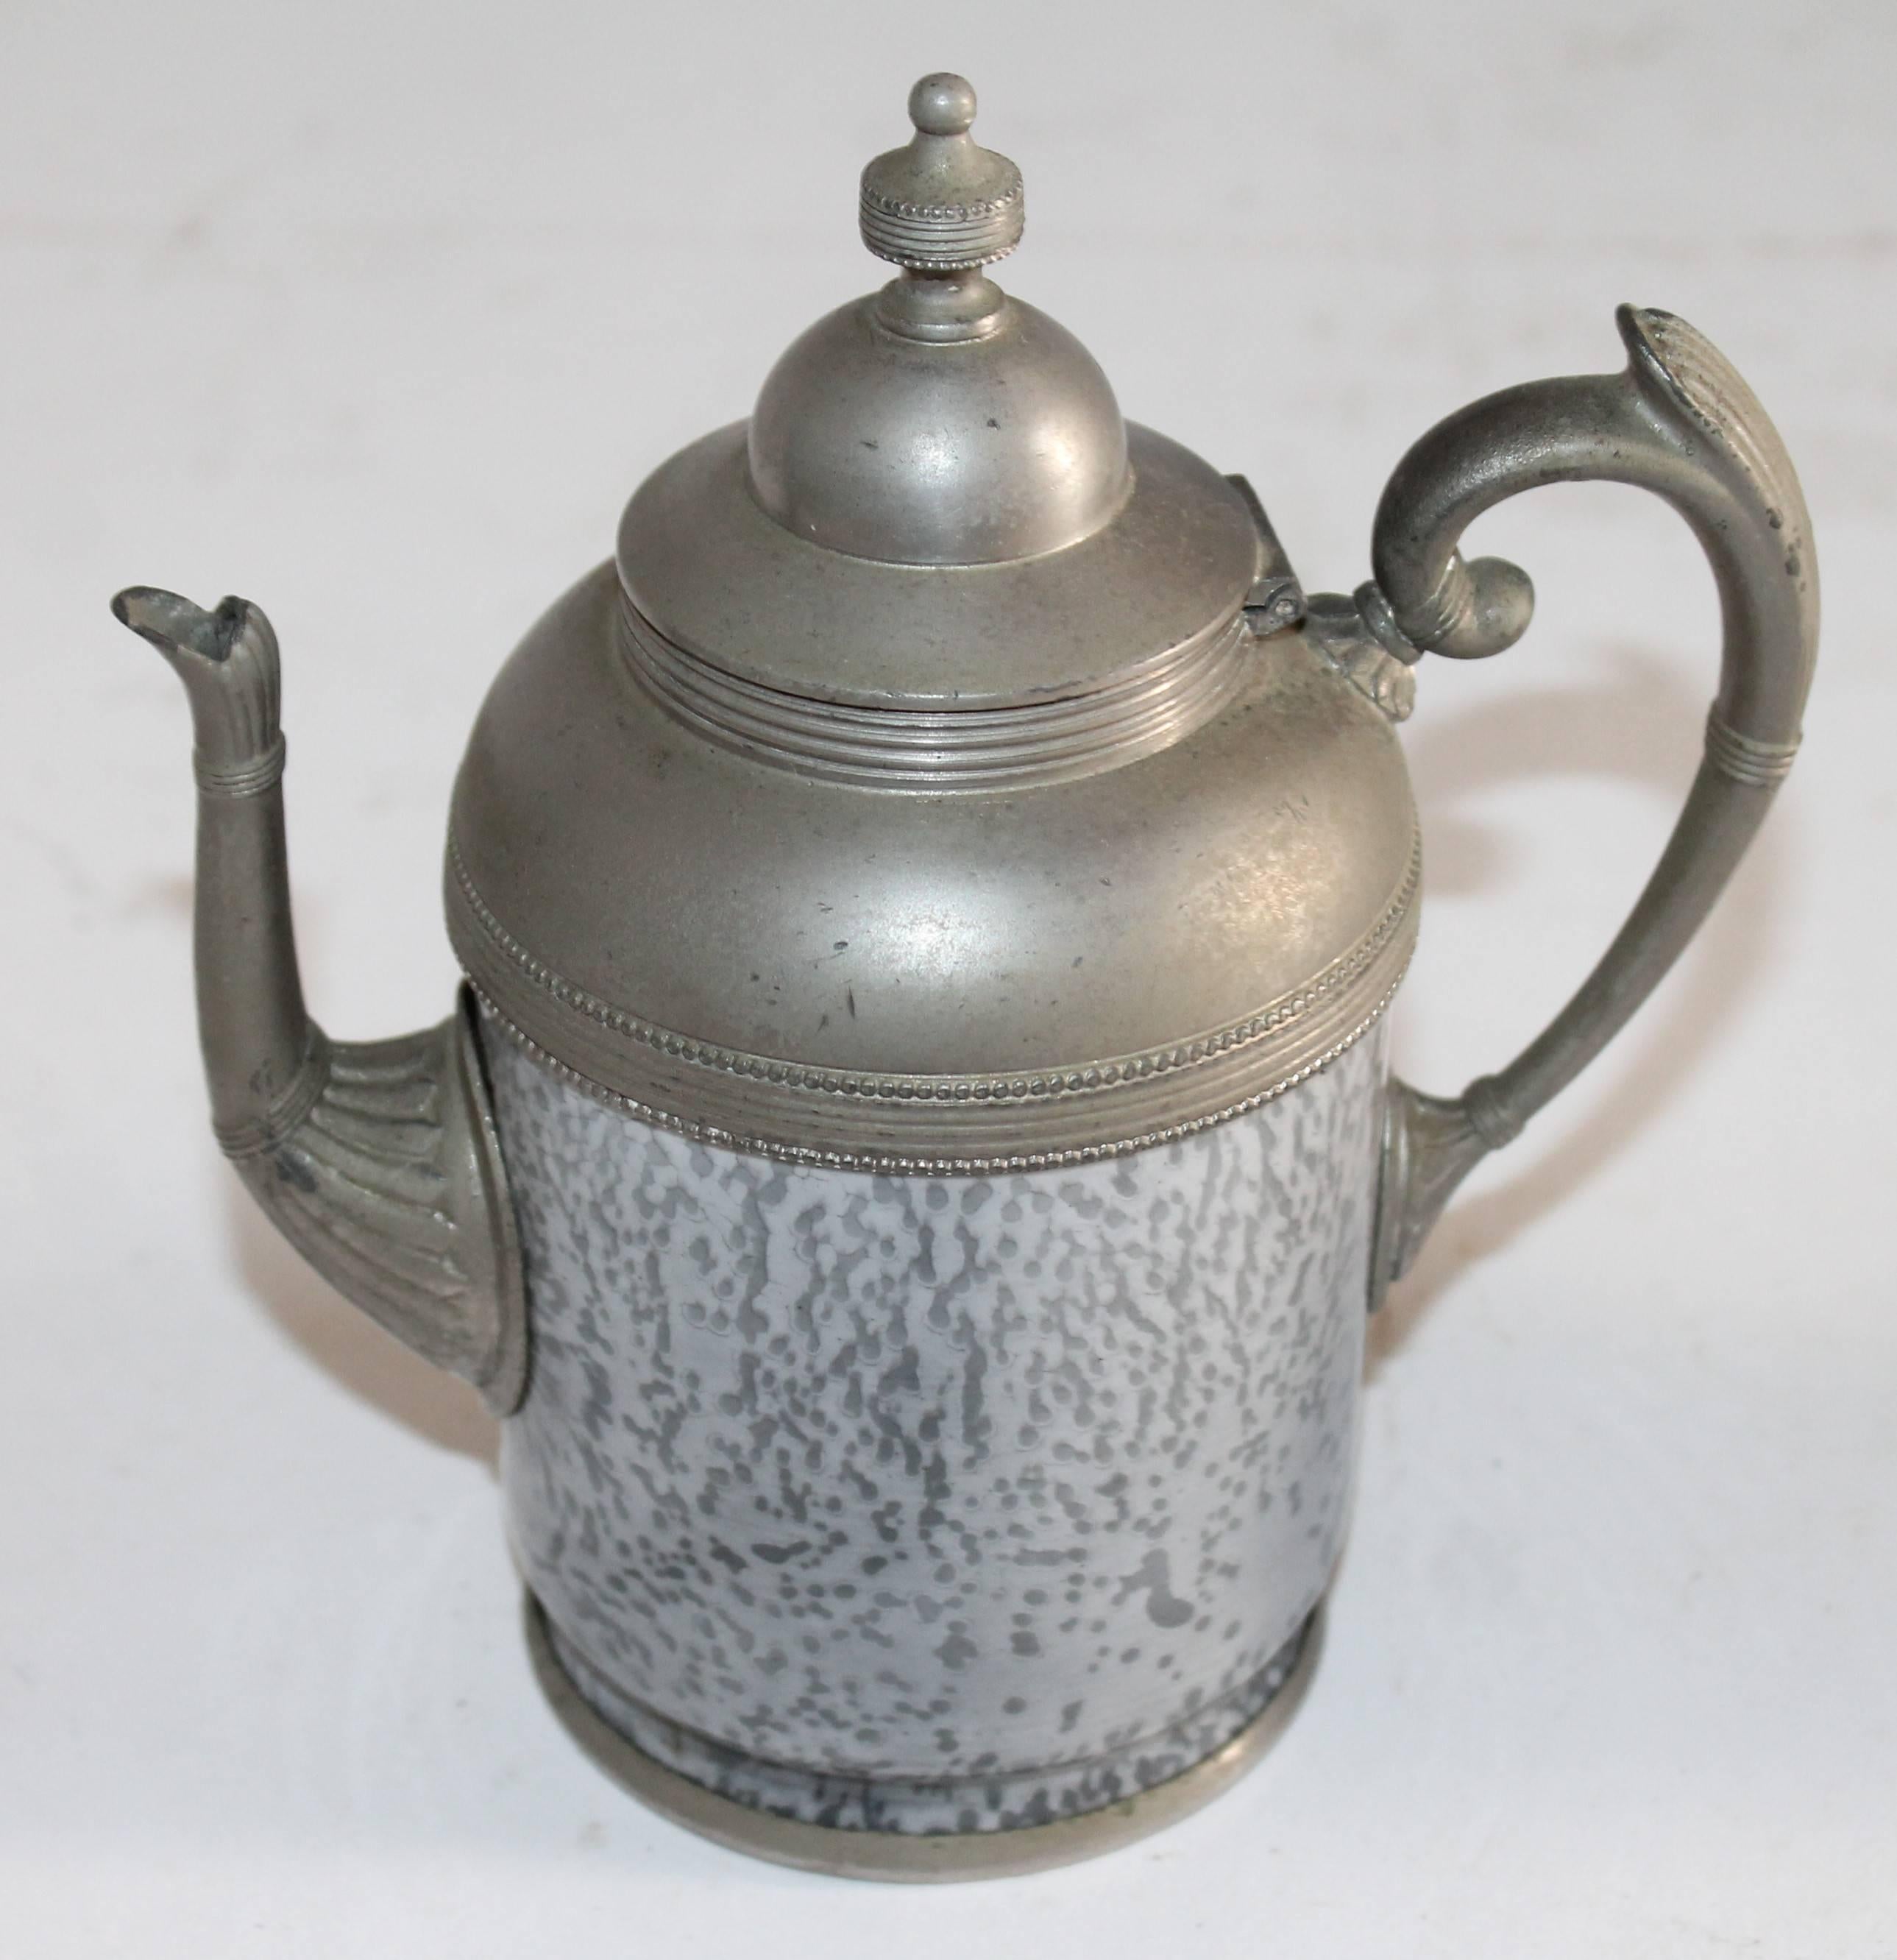 These early mid-19th century granite goose neck small tea pot and matching cup are in pristine condition and have come out of a private collection. These are so rare to find in such great condition.